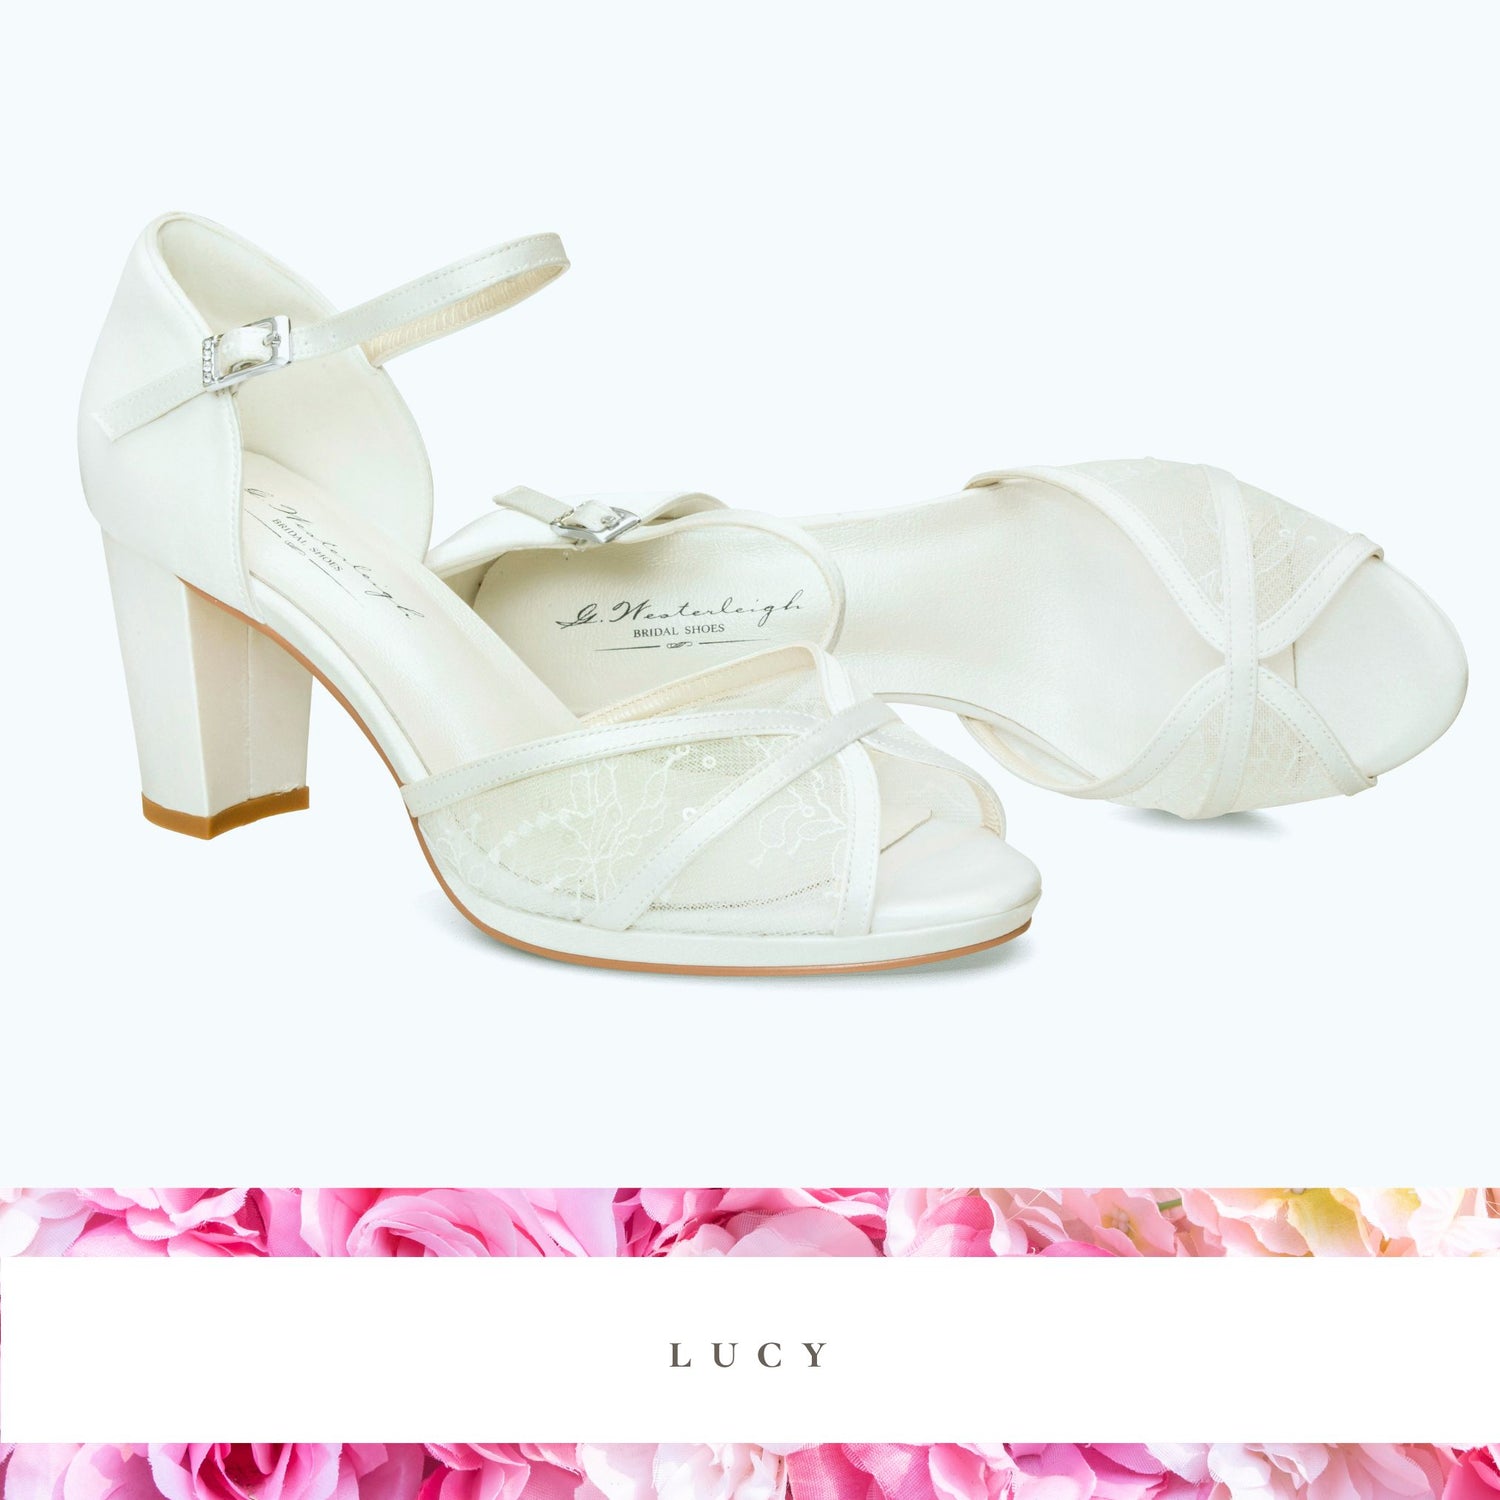 lucy wedding shoes